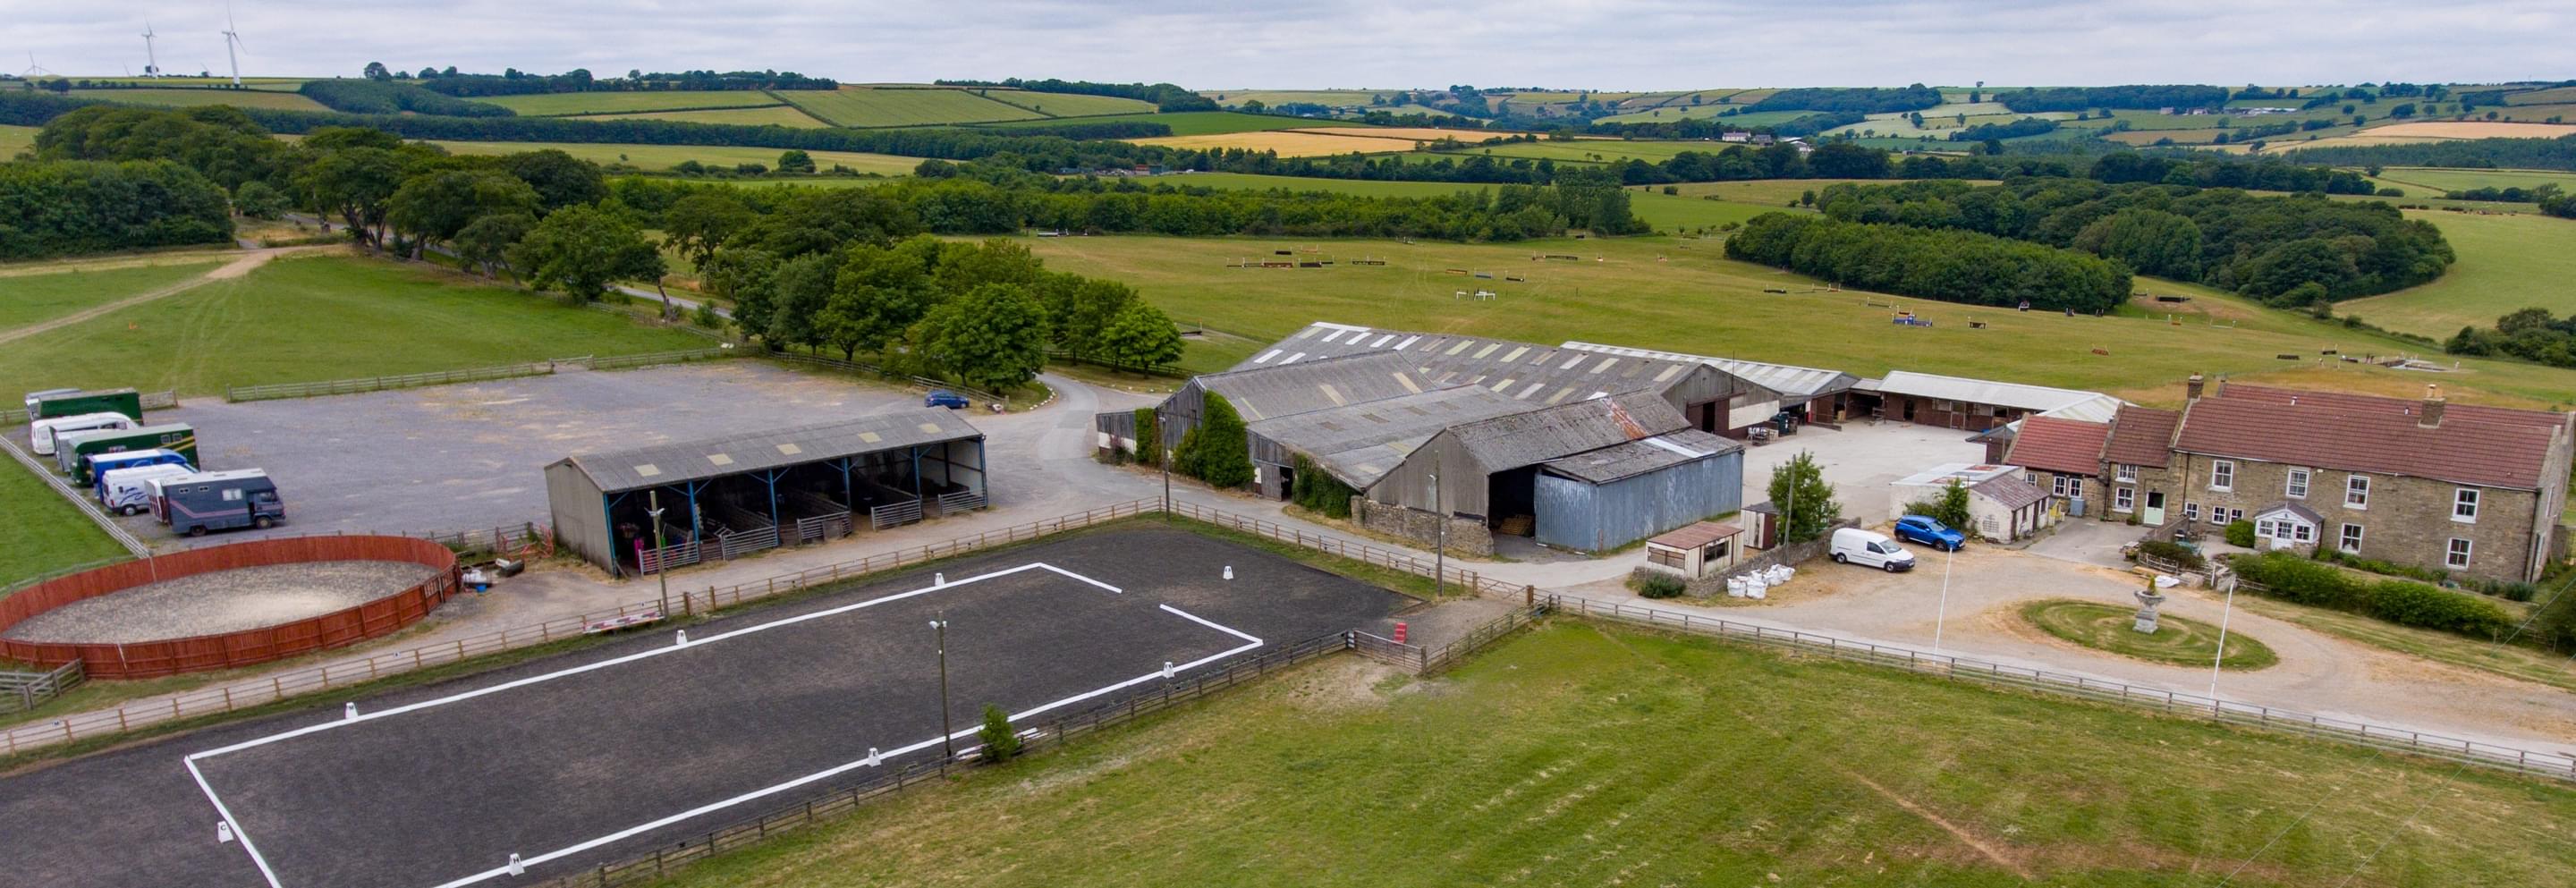 Ivesley Equestrian Centre Overview